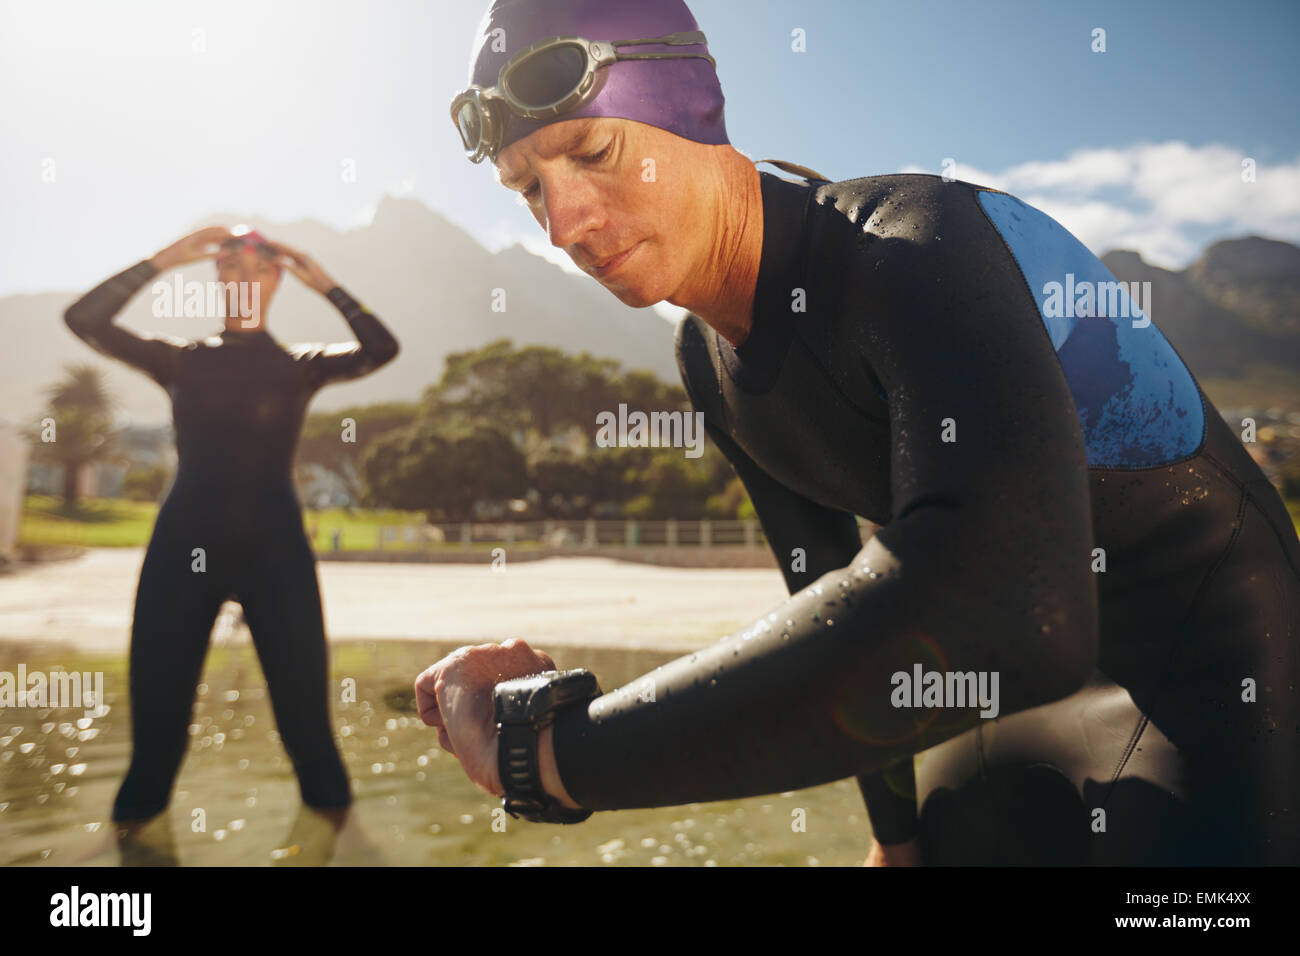 Focused young man checking his watch while in wetsuit at the lake. Man looking at watch after practice run. Triathletes. Stock Photo